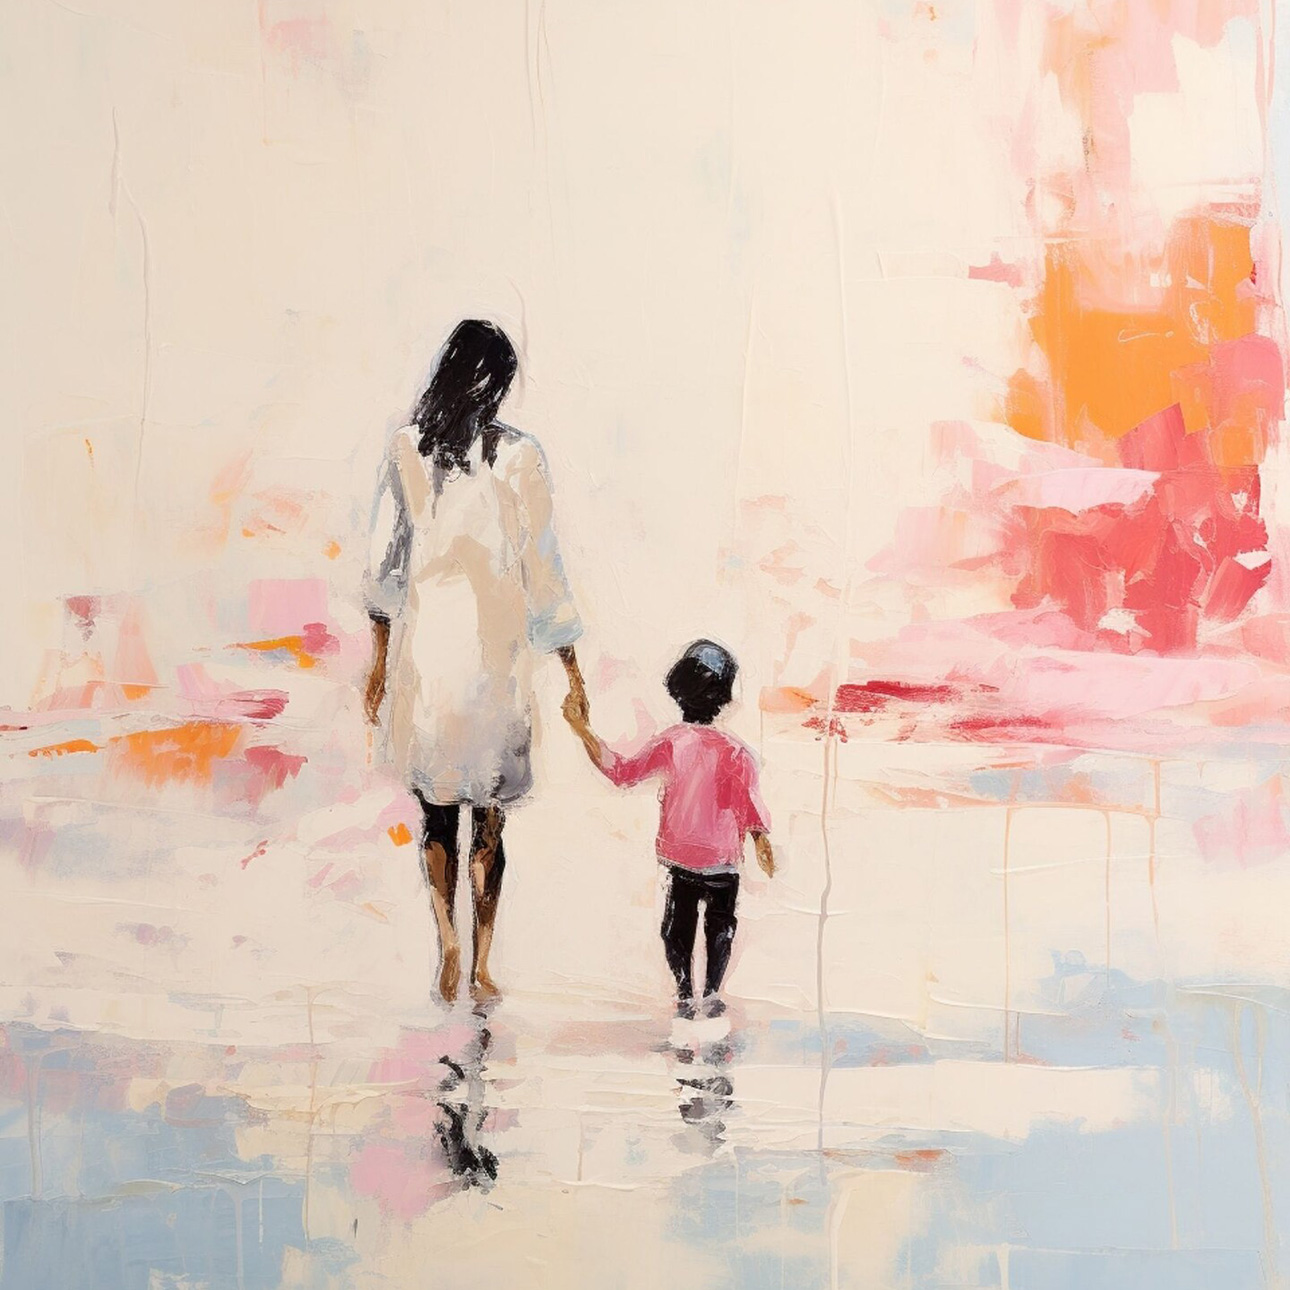 Mother and child painting